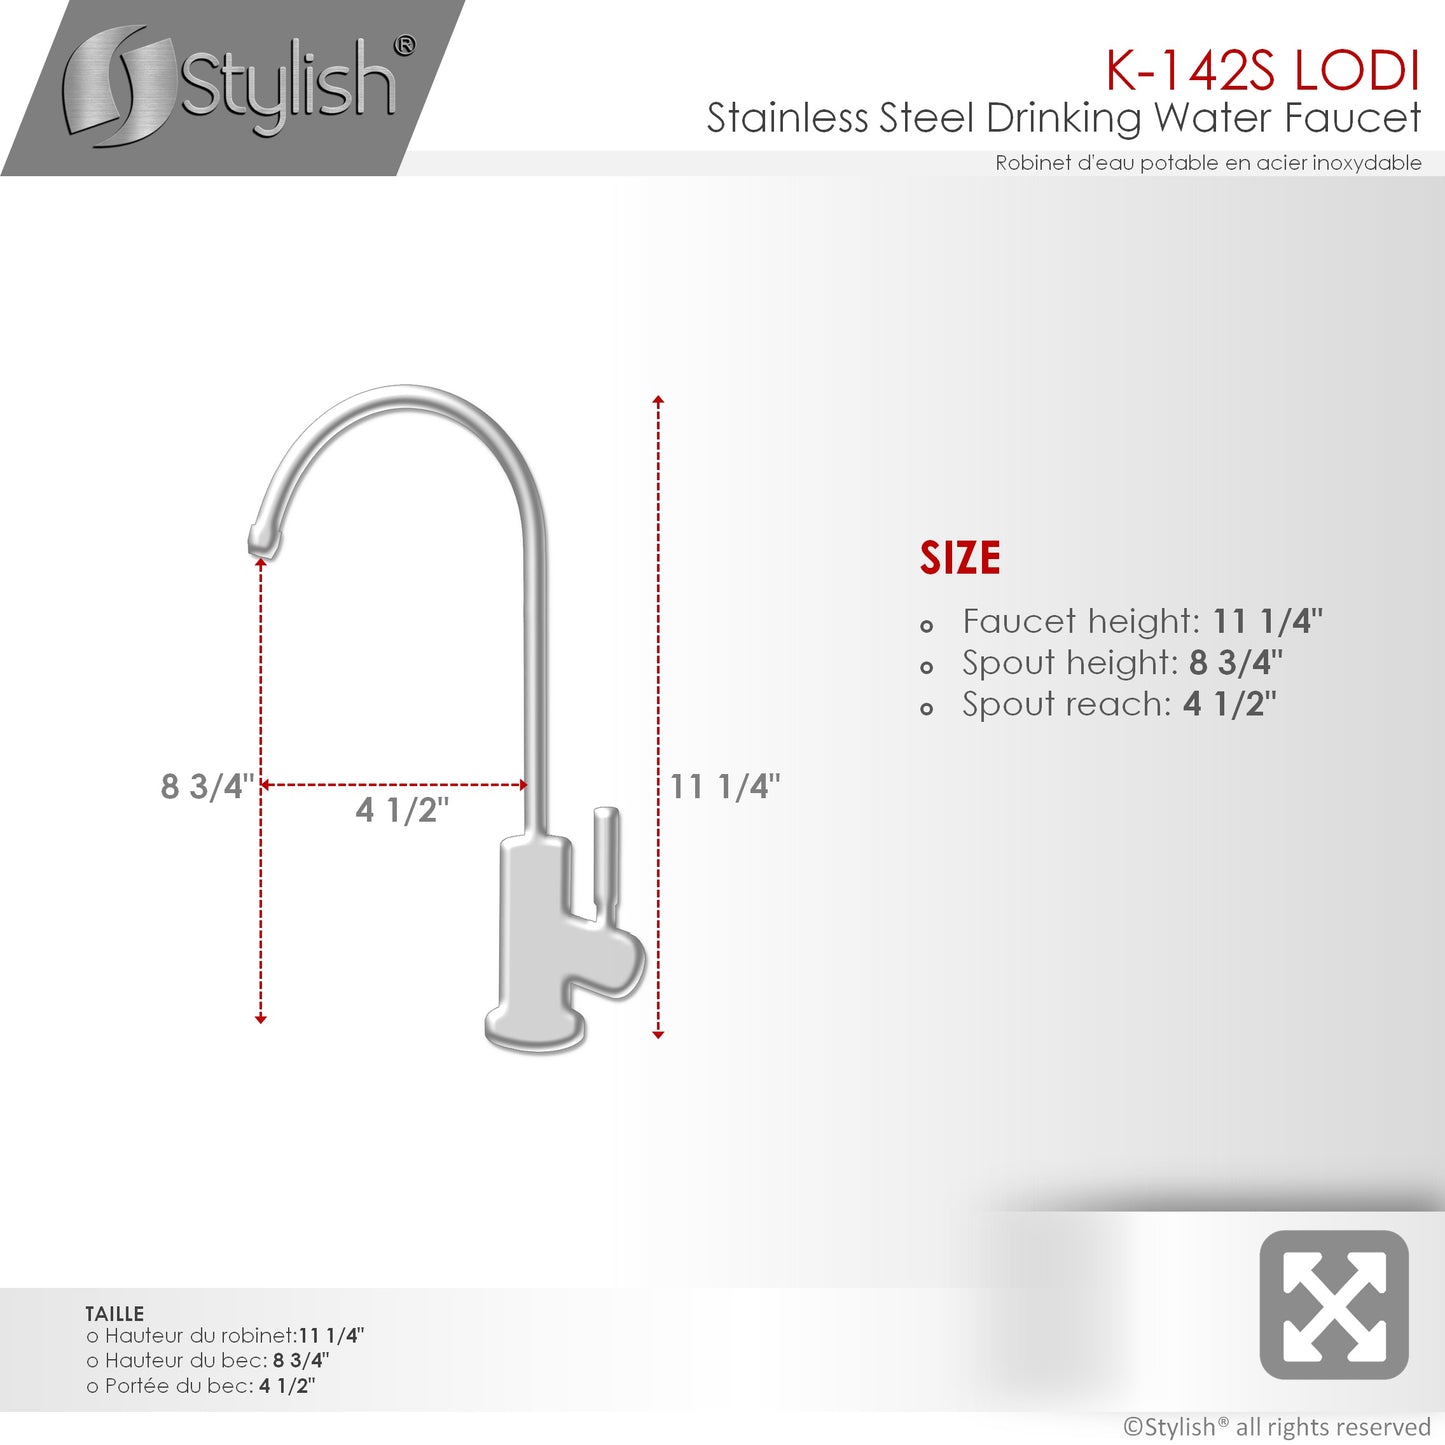 STYLISH Lodi Kitchen Sink Drinking Water Tap Faucet, Stainless Steel Brushed Black Finish K-142S